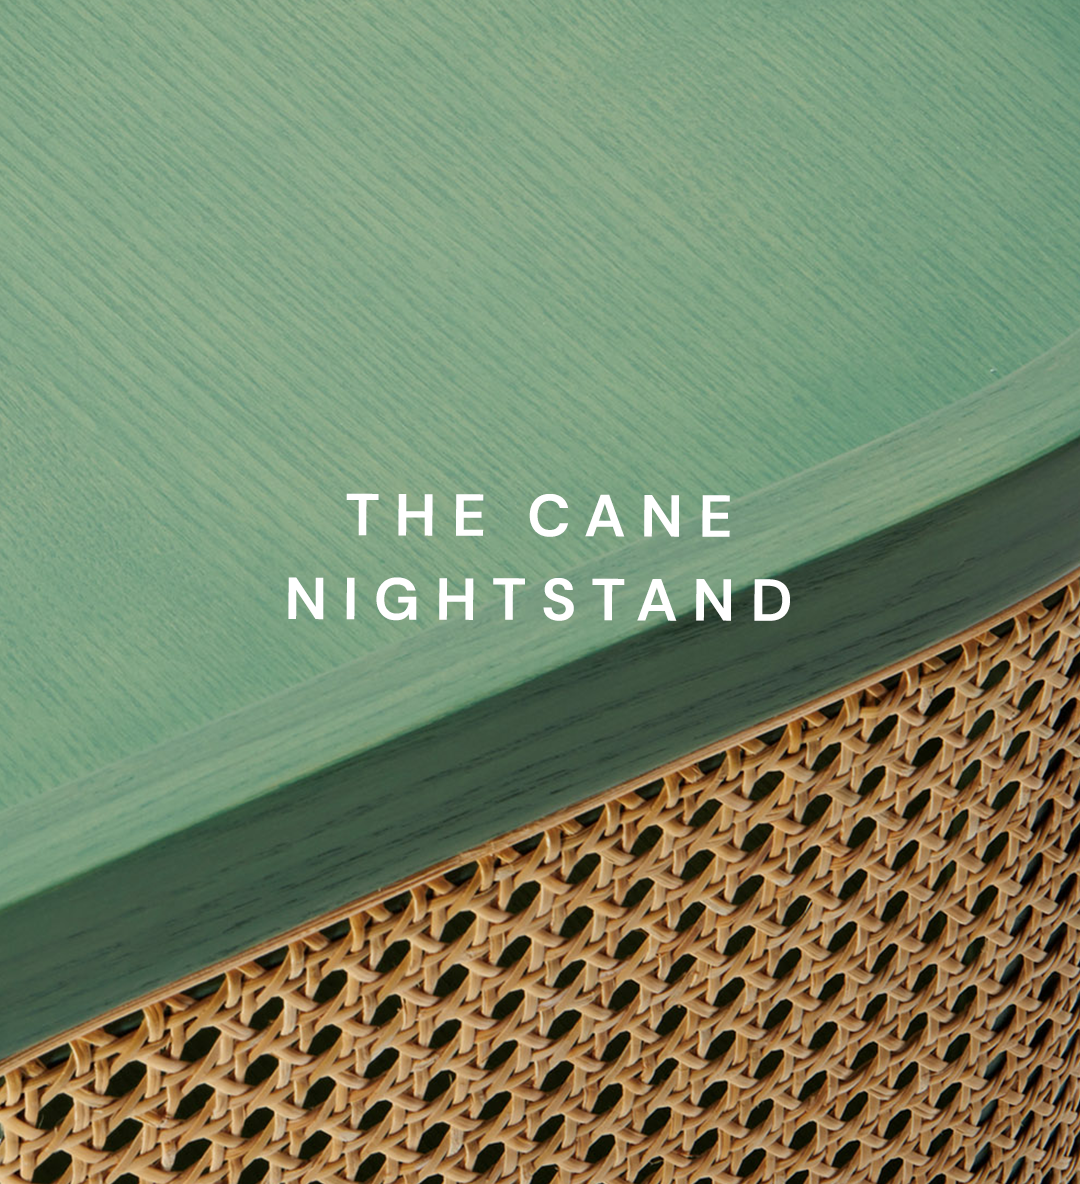 The Cane Nightstand